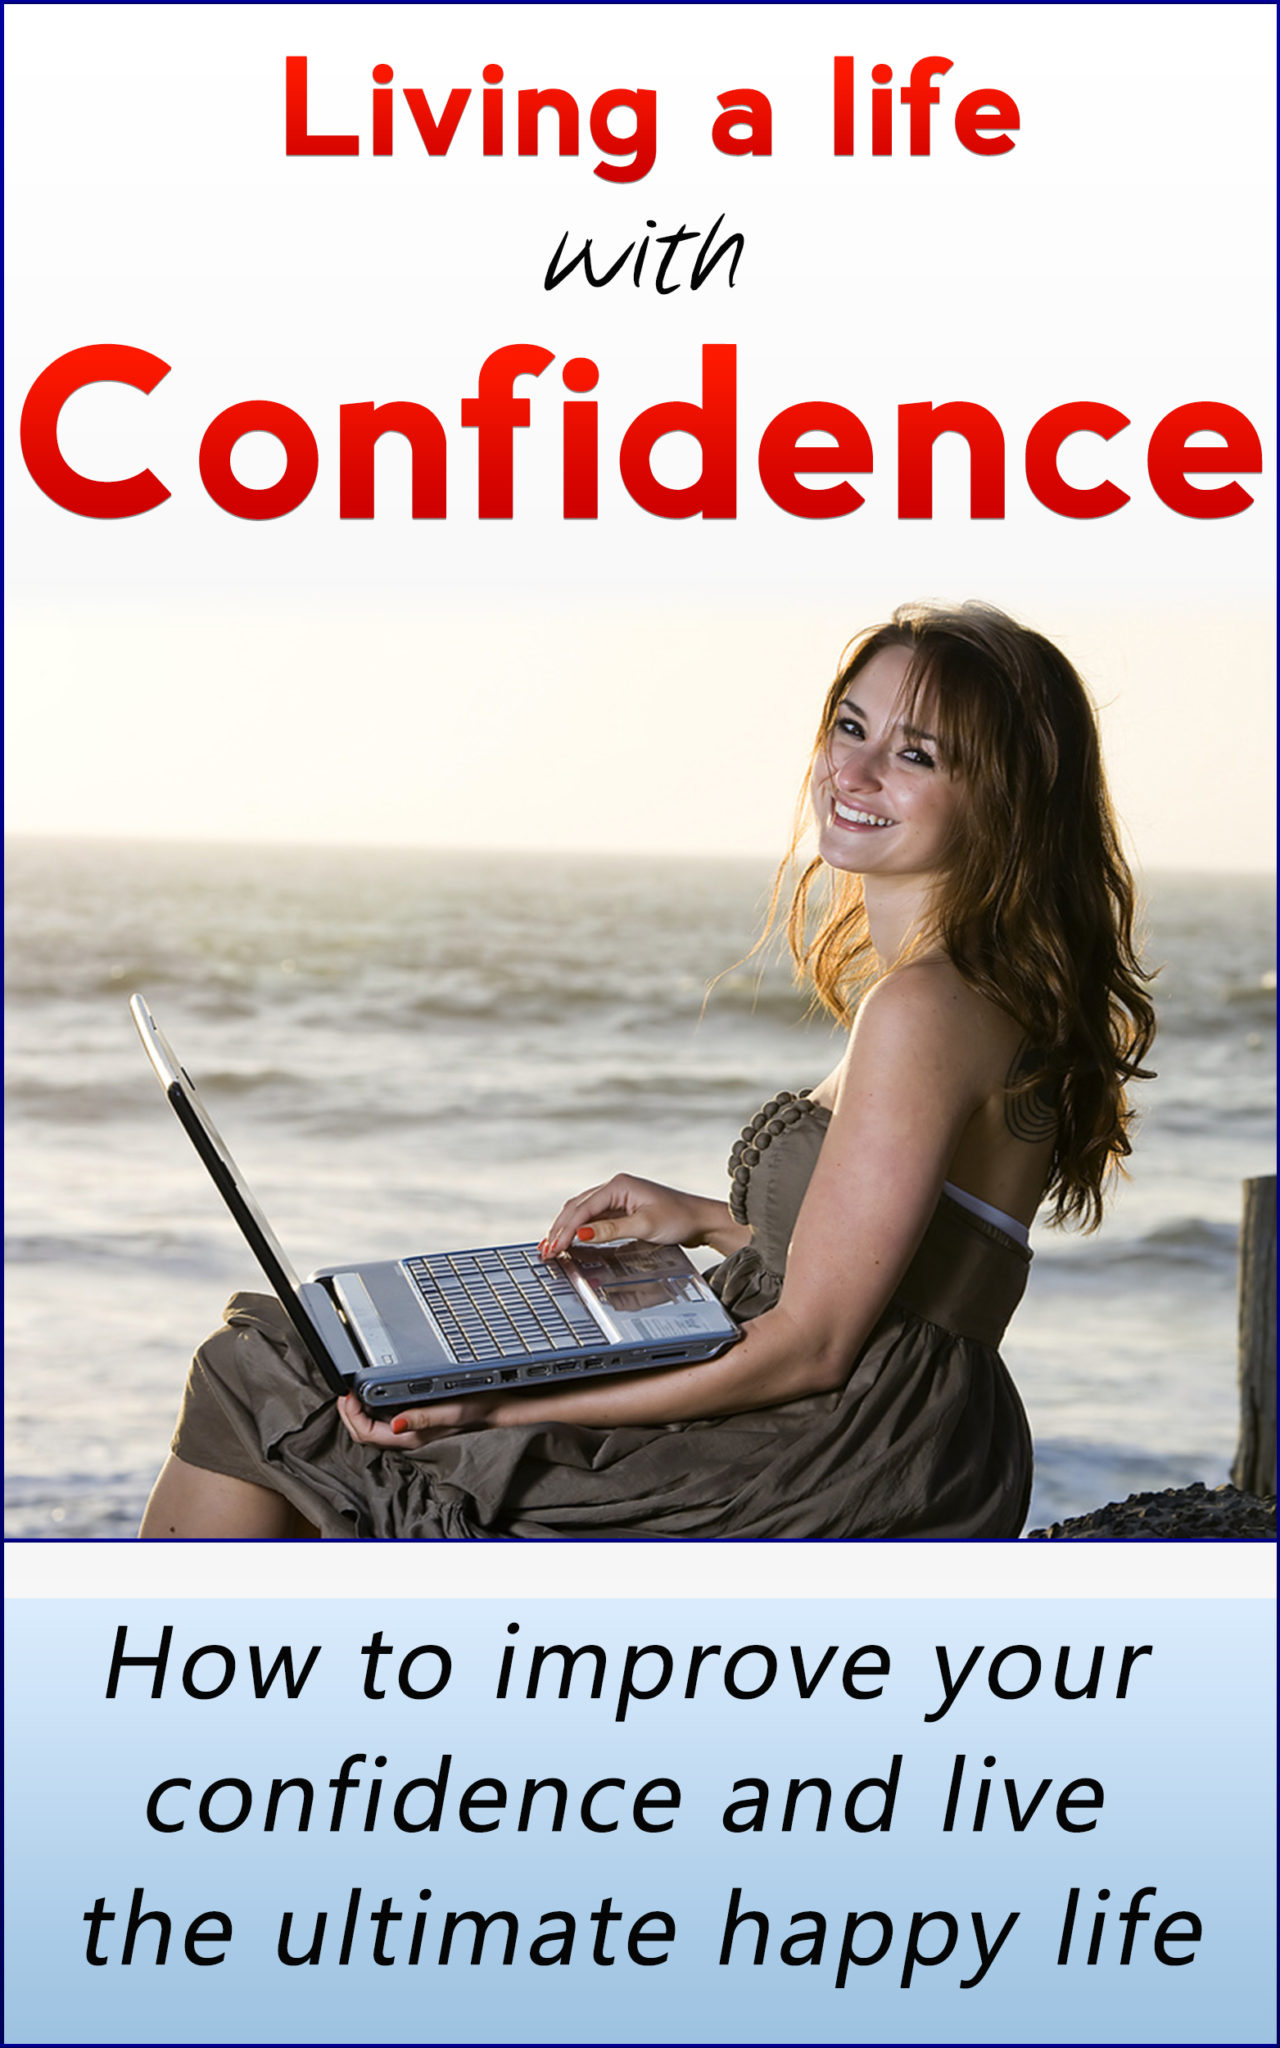 Living a Life with Confidence: How to improve your confidence and live the ultimate happy life by Jeffrey Robin